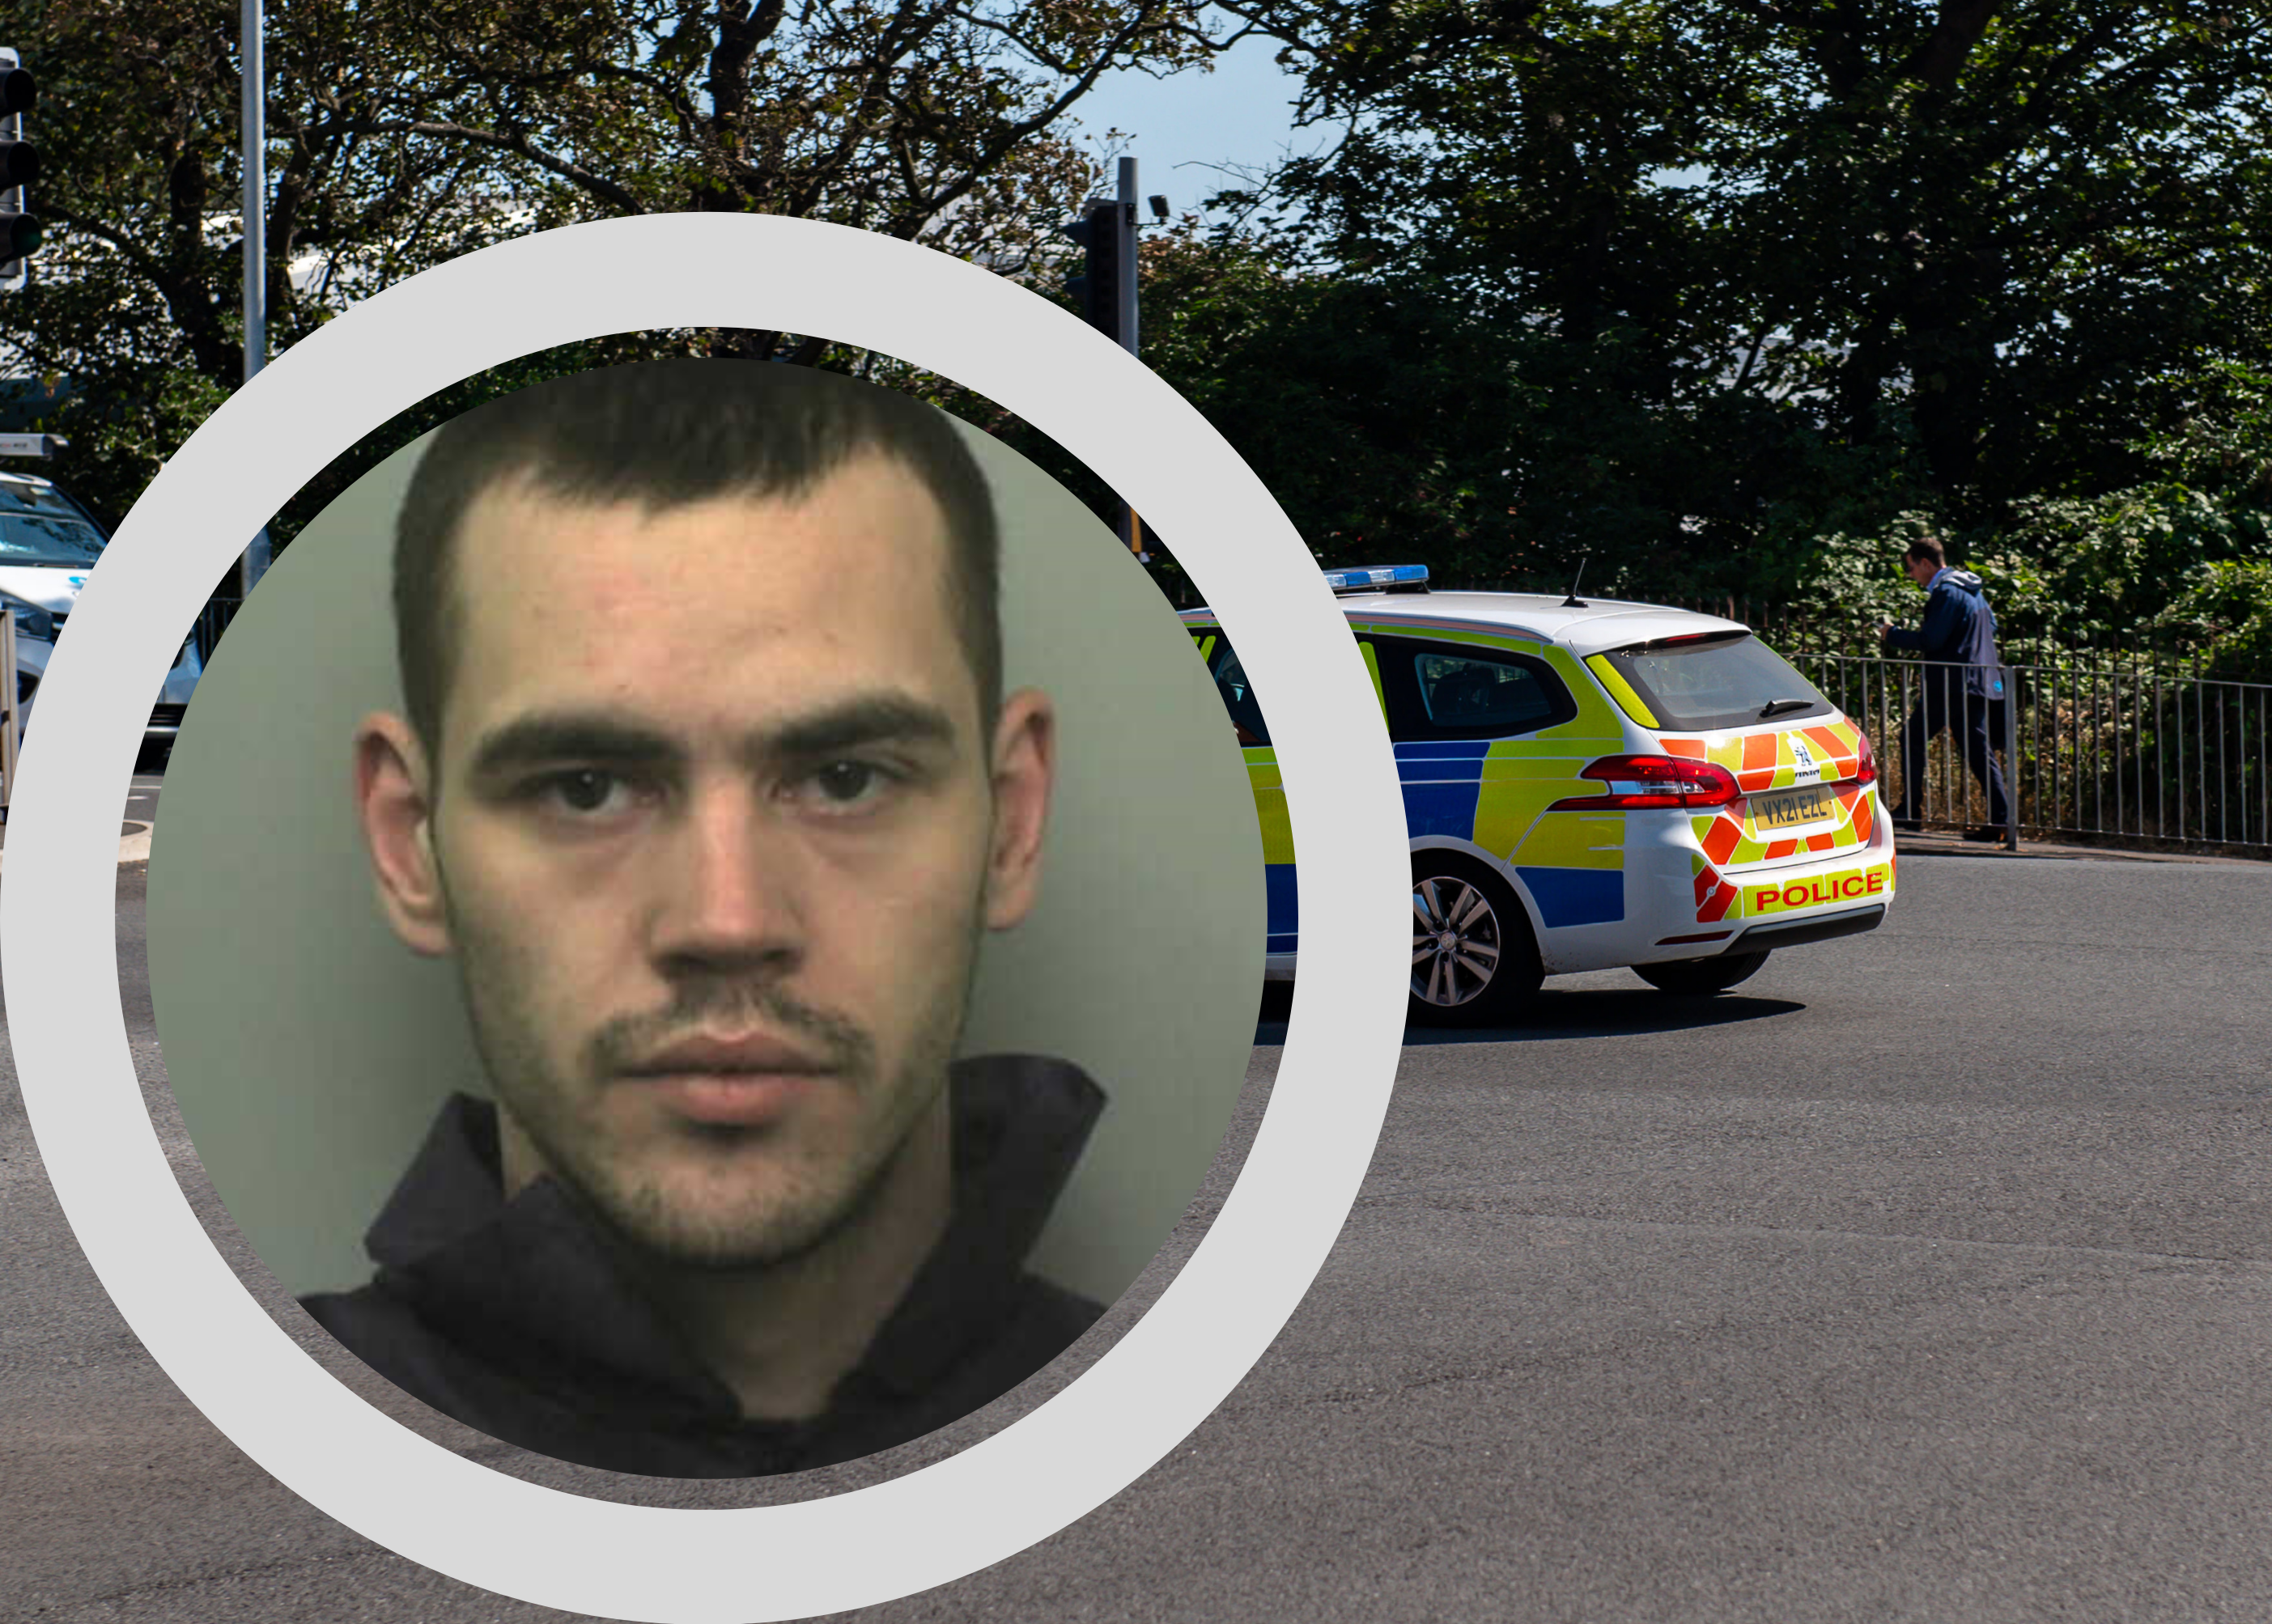 NEWS | ‘Do not approach’ – Police searching for sex offender with links to West Mercia